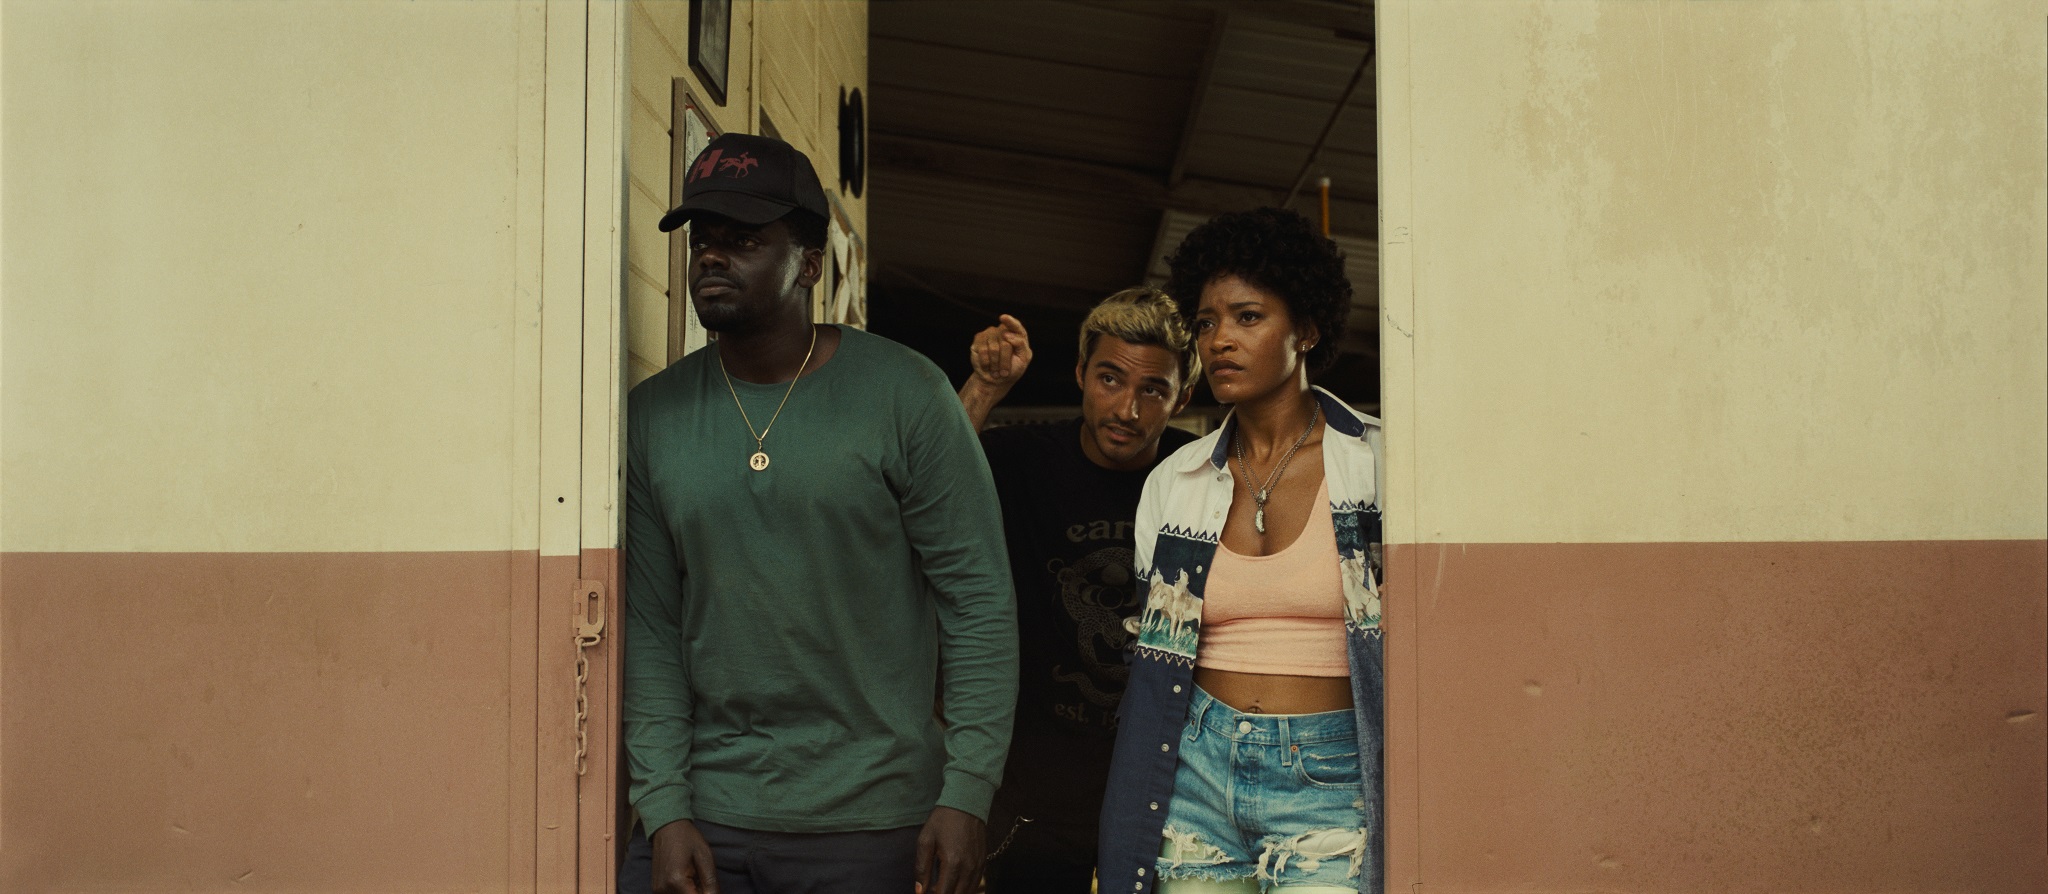 Daniel Kaluuya, Brandon Perea, and Keke Palmer in NOPE, written, produced, and directed by Jordan Peele. Image: courtesy of Universal Pictures